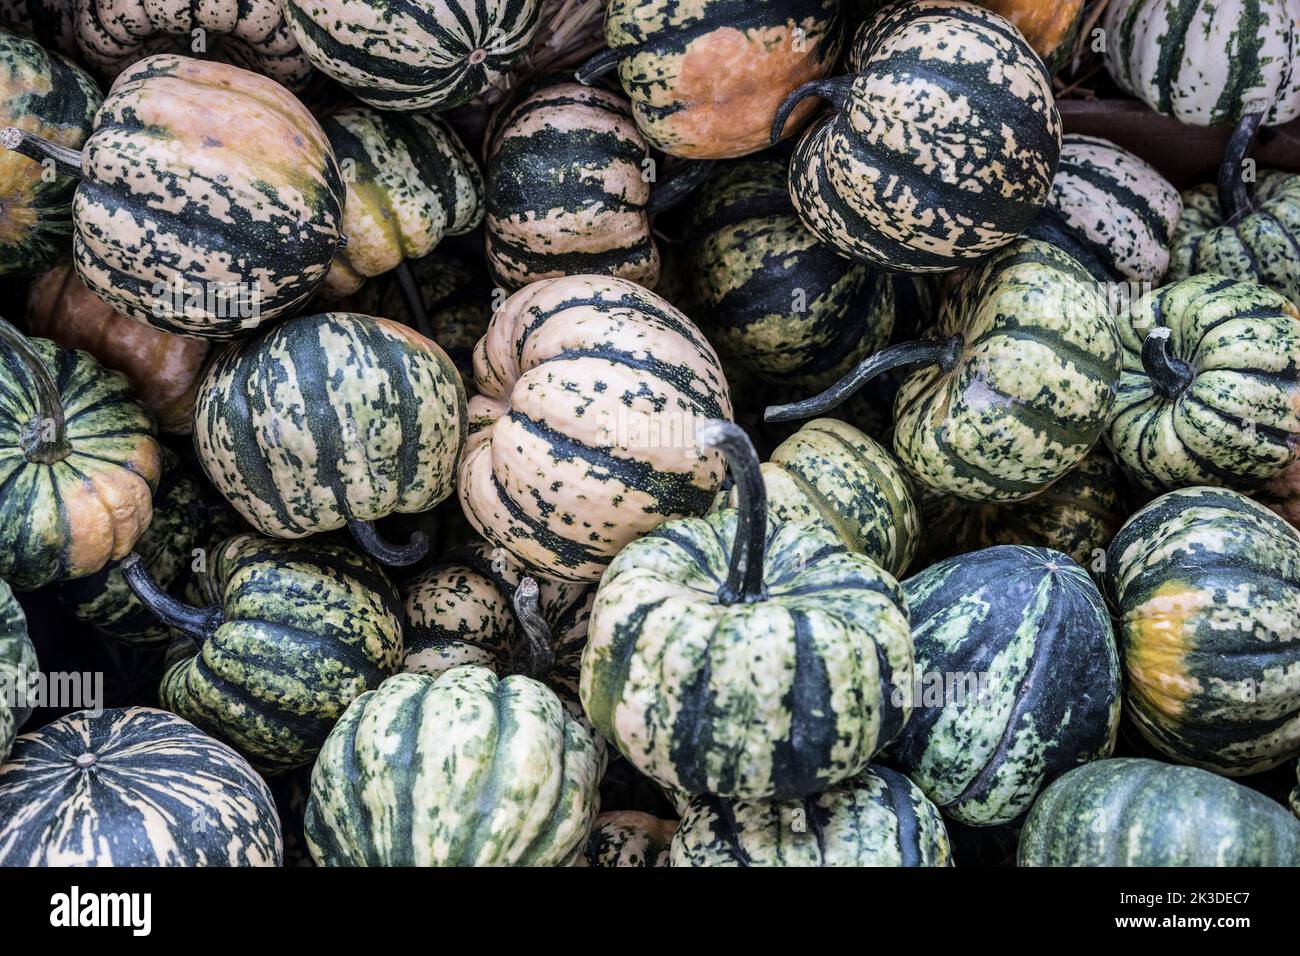 Pile of small green pumpkins at the farmers market. Stock Photo